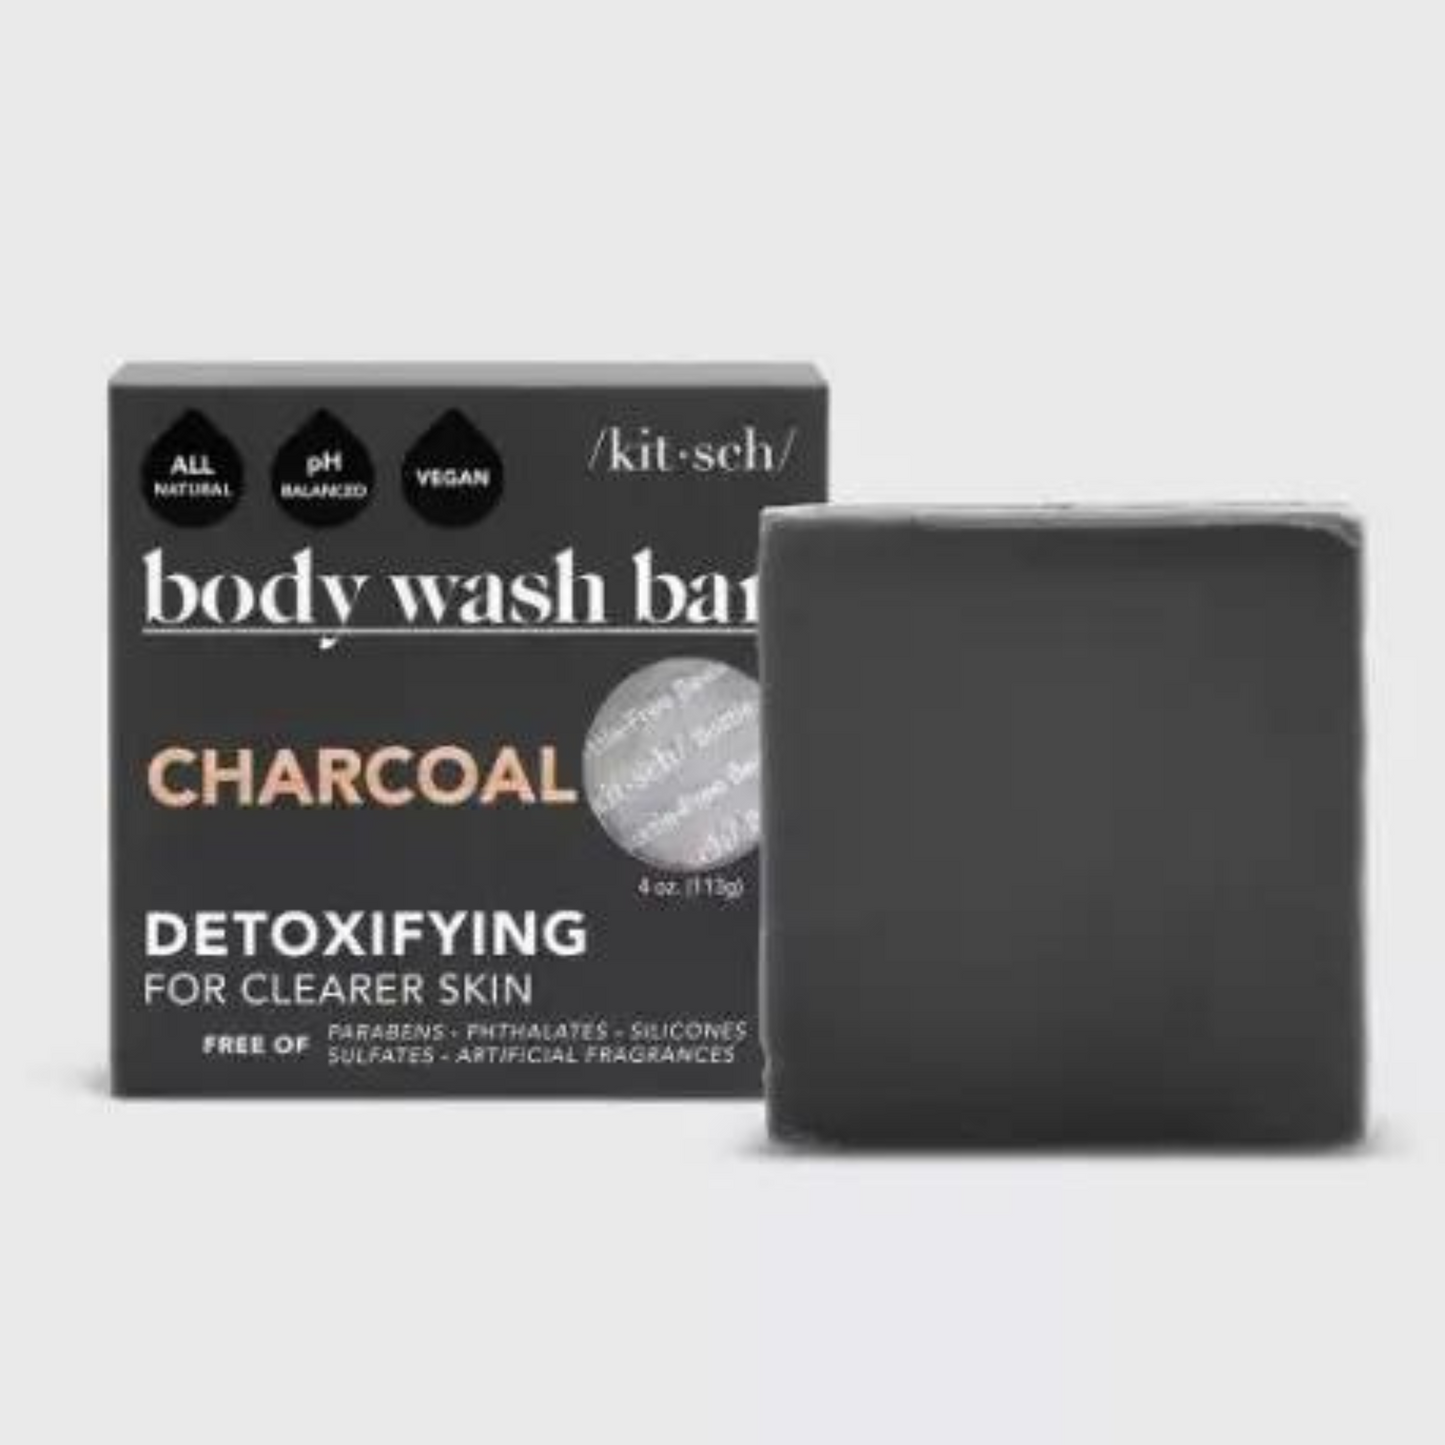 Say goodbye to impurities with Charcoal Detoxifying Body Wash Bar. Our all-natural bar is loaded with natural charcoal that helps to absorb & release impurities while gently cleansing & nourishing the skin. Plus, it's free of sulfates, parabens, and phthalates. No drying or stripping of skin here! Switch to Bottle-Free Beauty®️ Bars to reduce plastic consumption and support a zero-waste lifestyle.